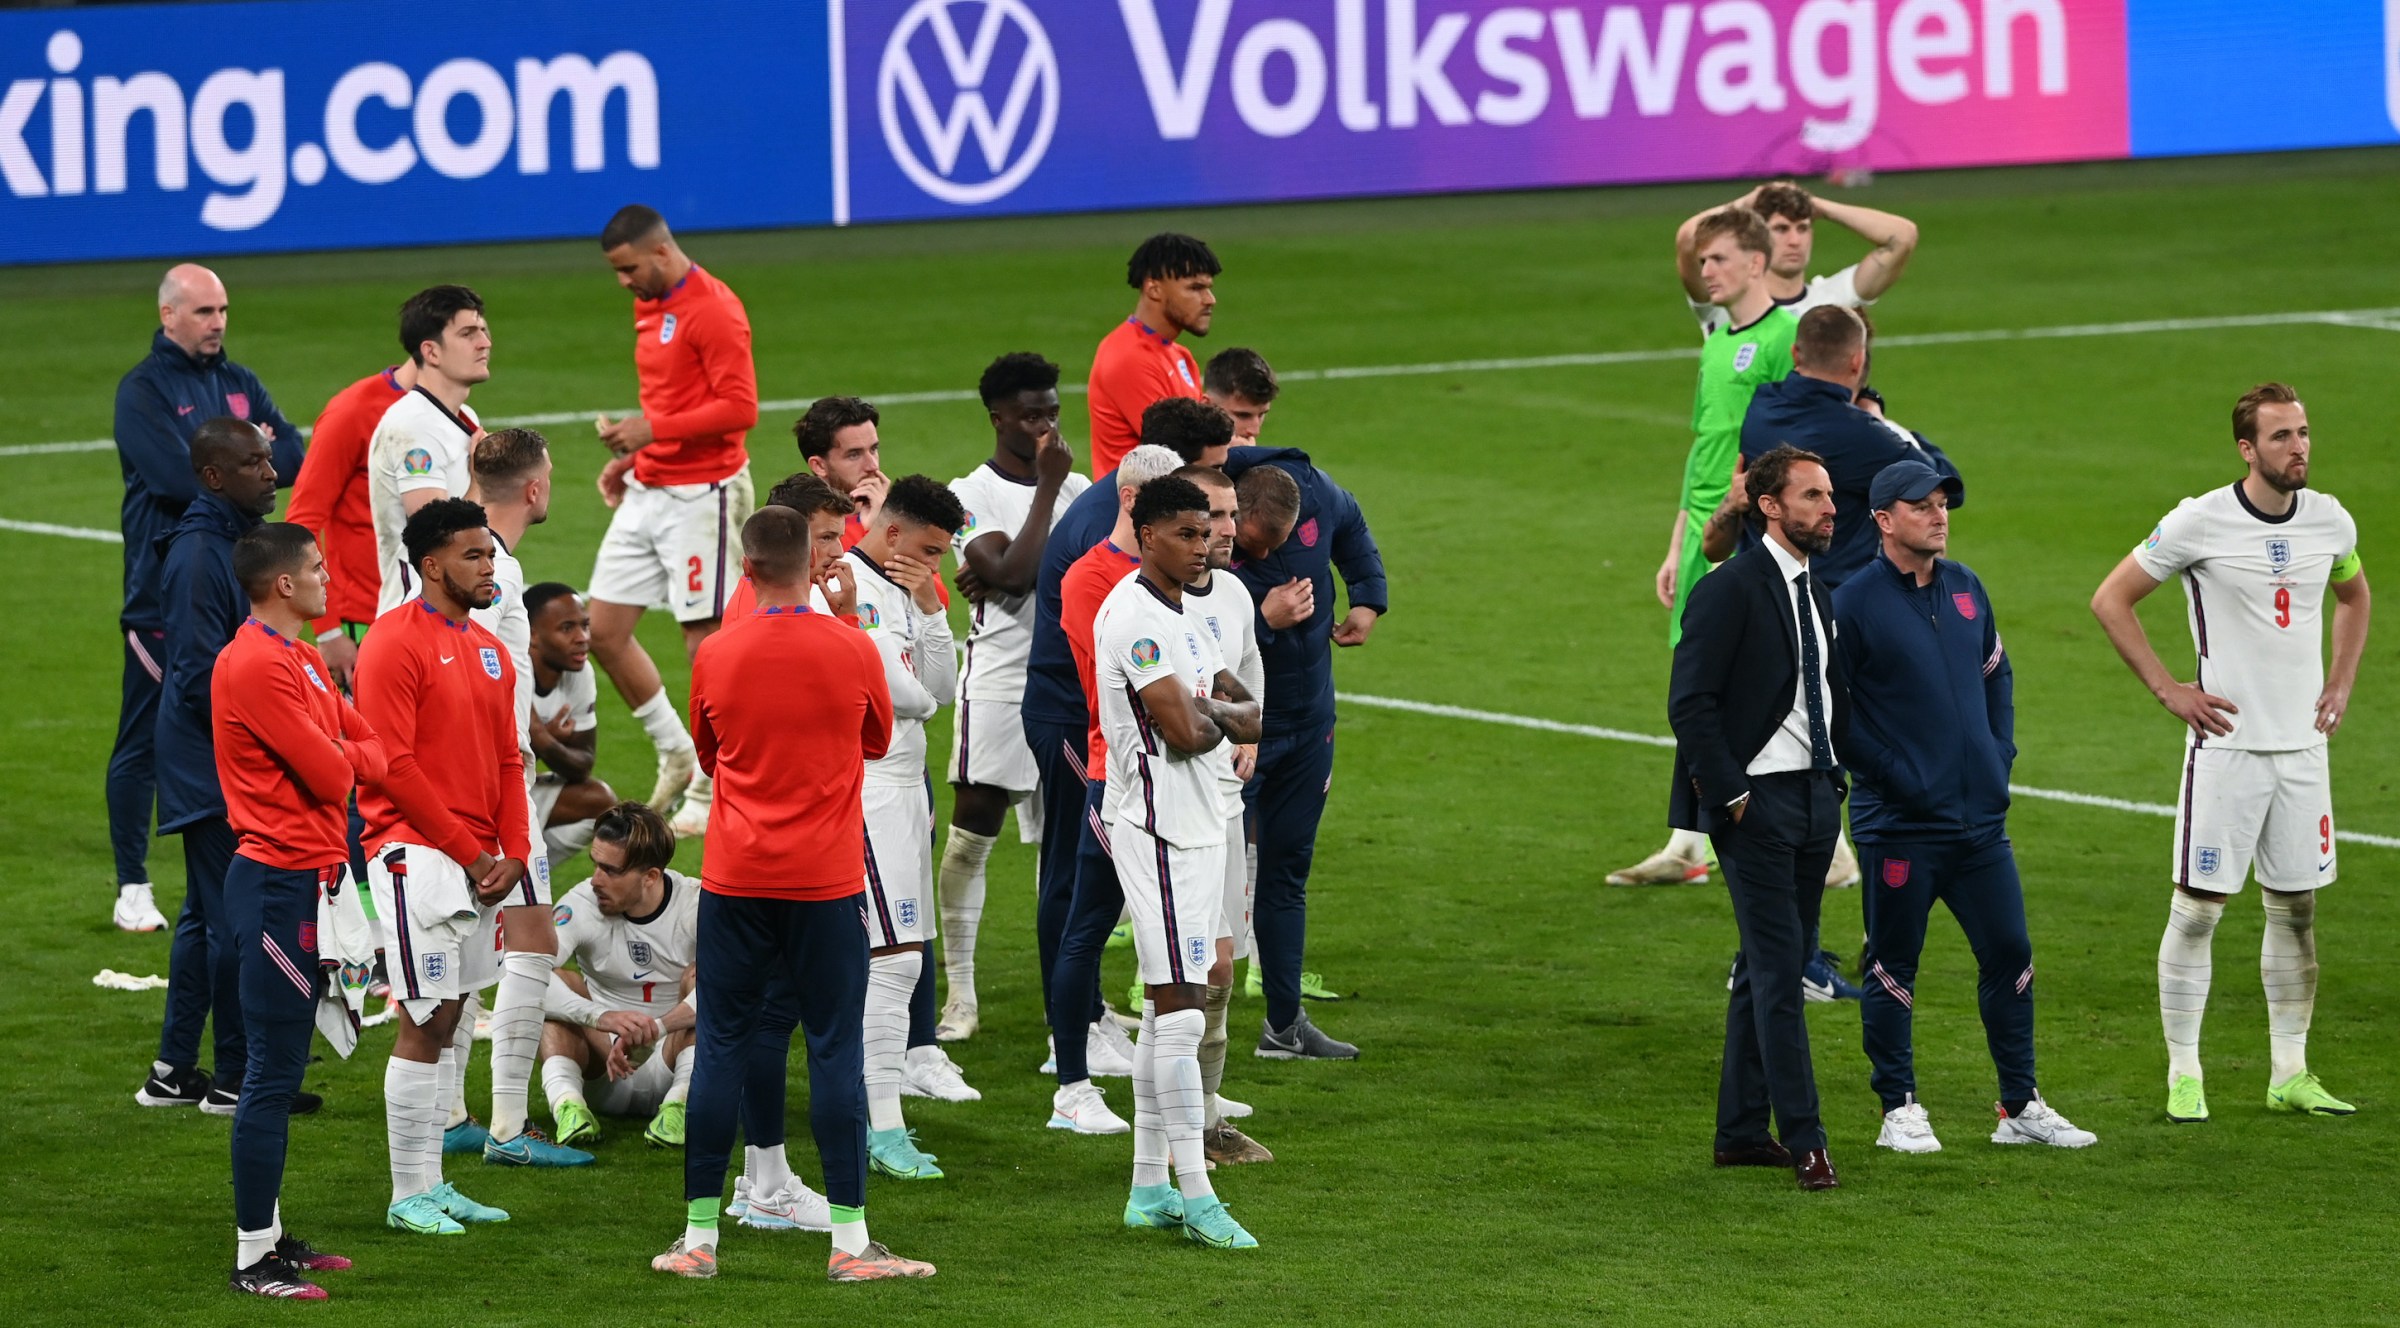 England players look on dejected after losing in the penalty shoot out during the UEFA Euro 2020 Championship Final between Italy and England at Wembley Stadium on July 11, 2021 in London, England.